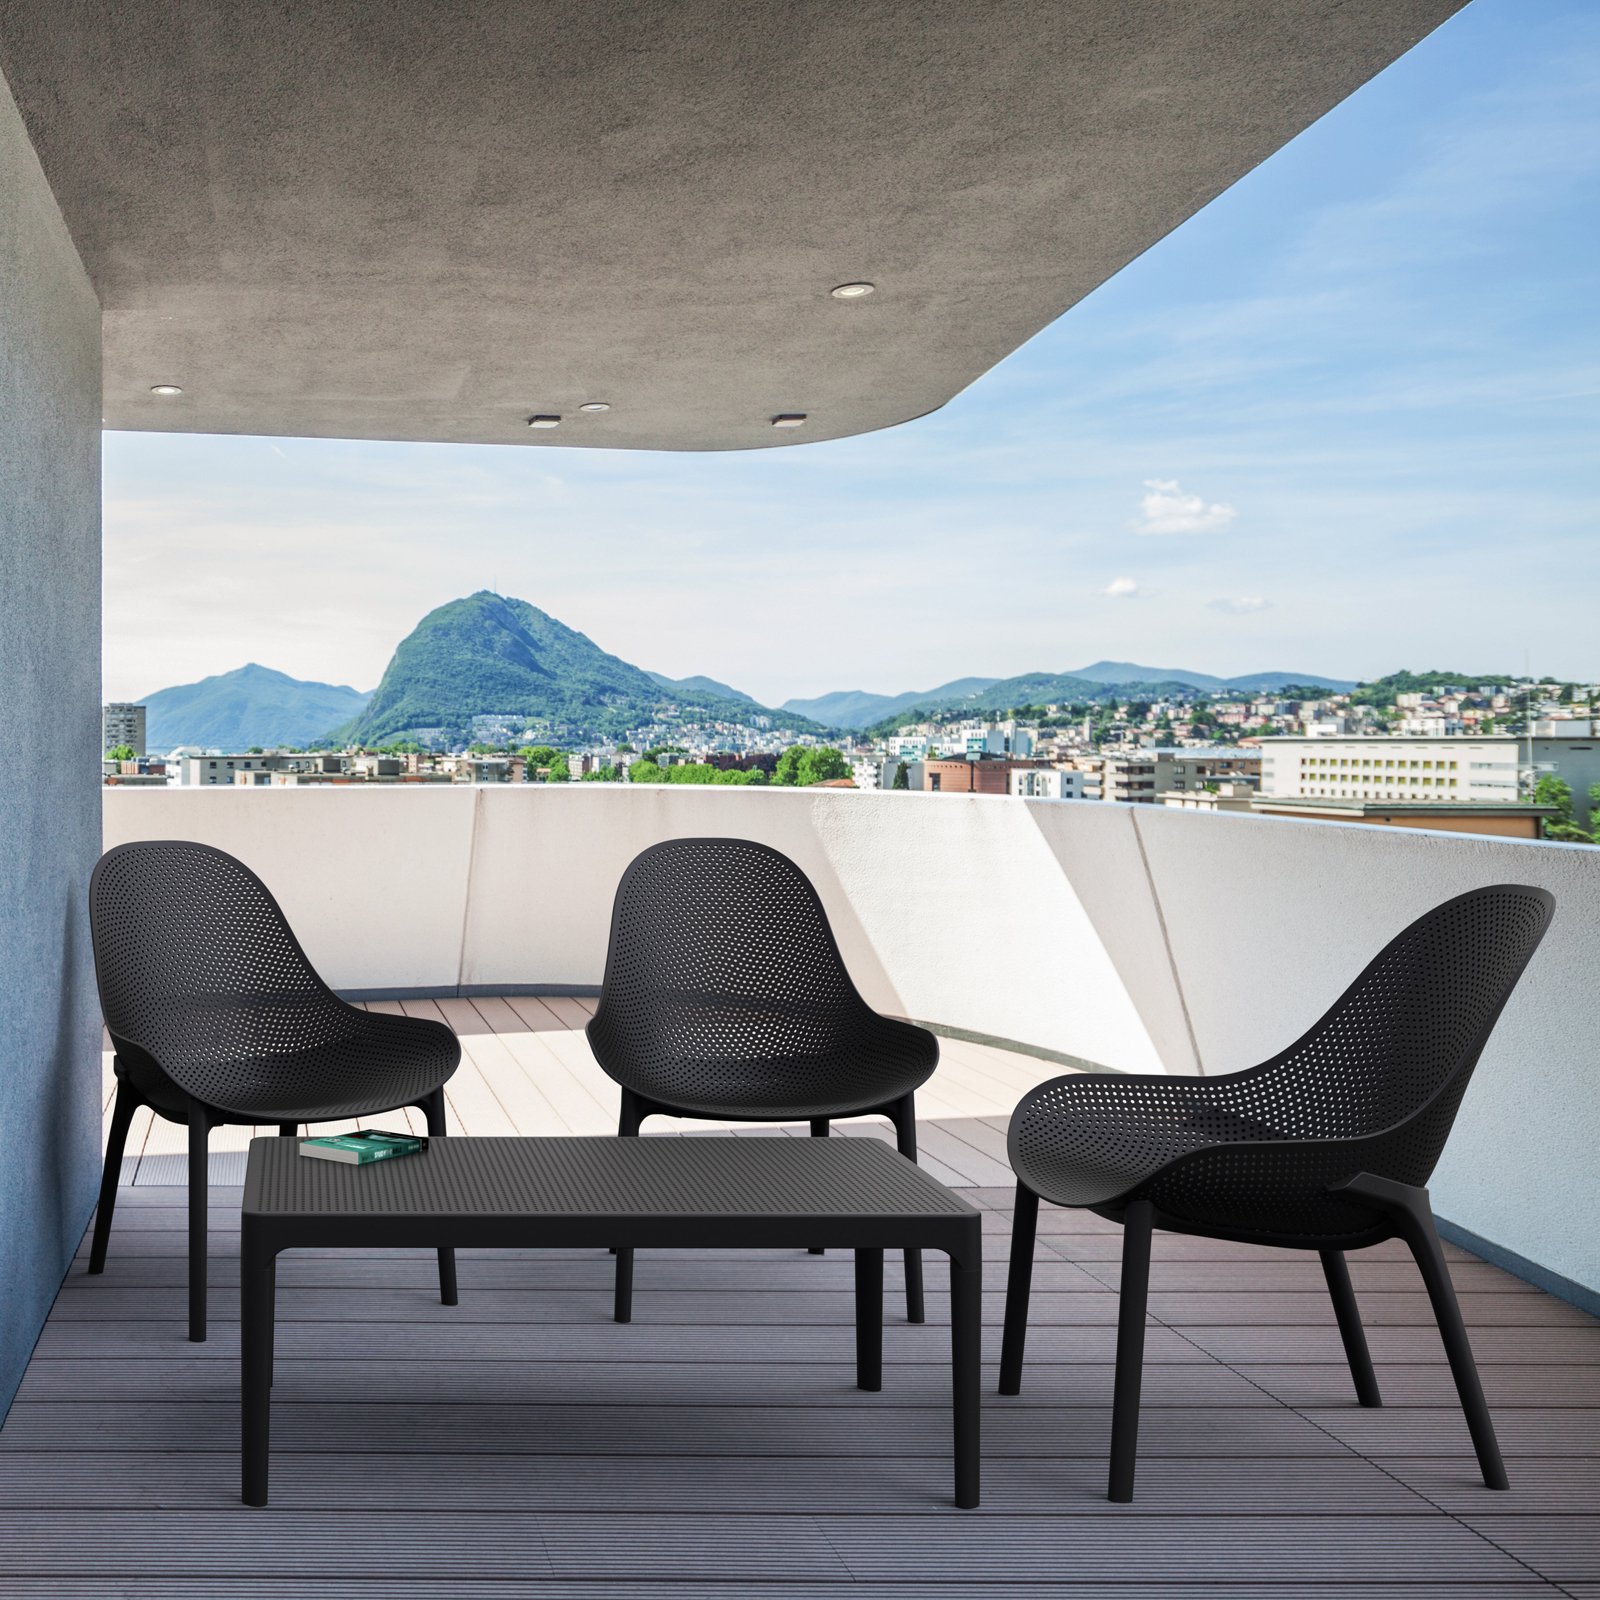 Compamia Sky Patio Chair in Taupe - image 4 of 11